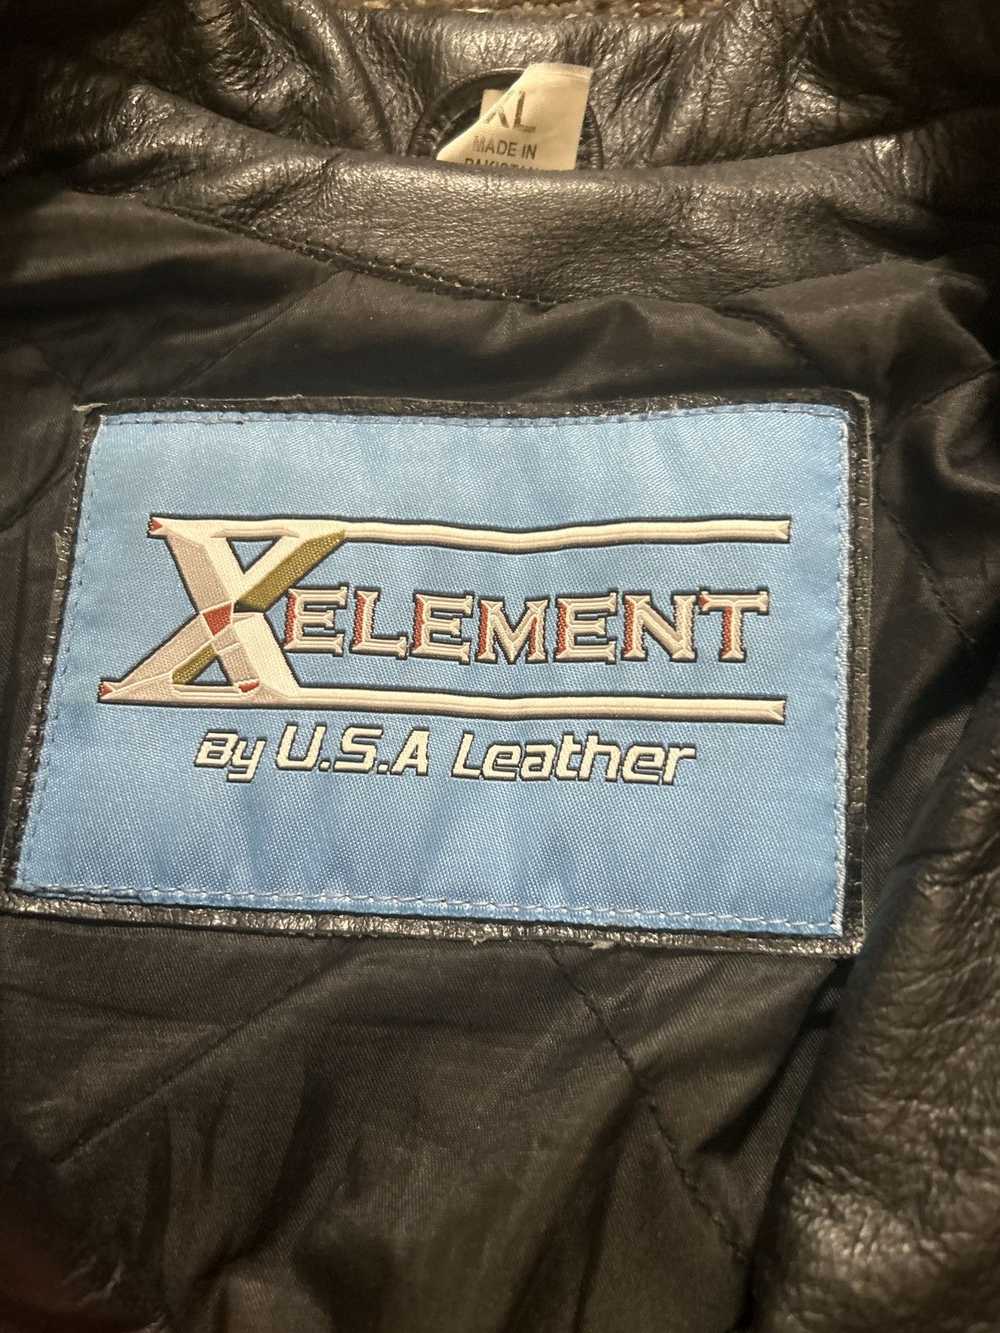 Xelement Xelement made in USA leather jacket - image 3